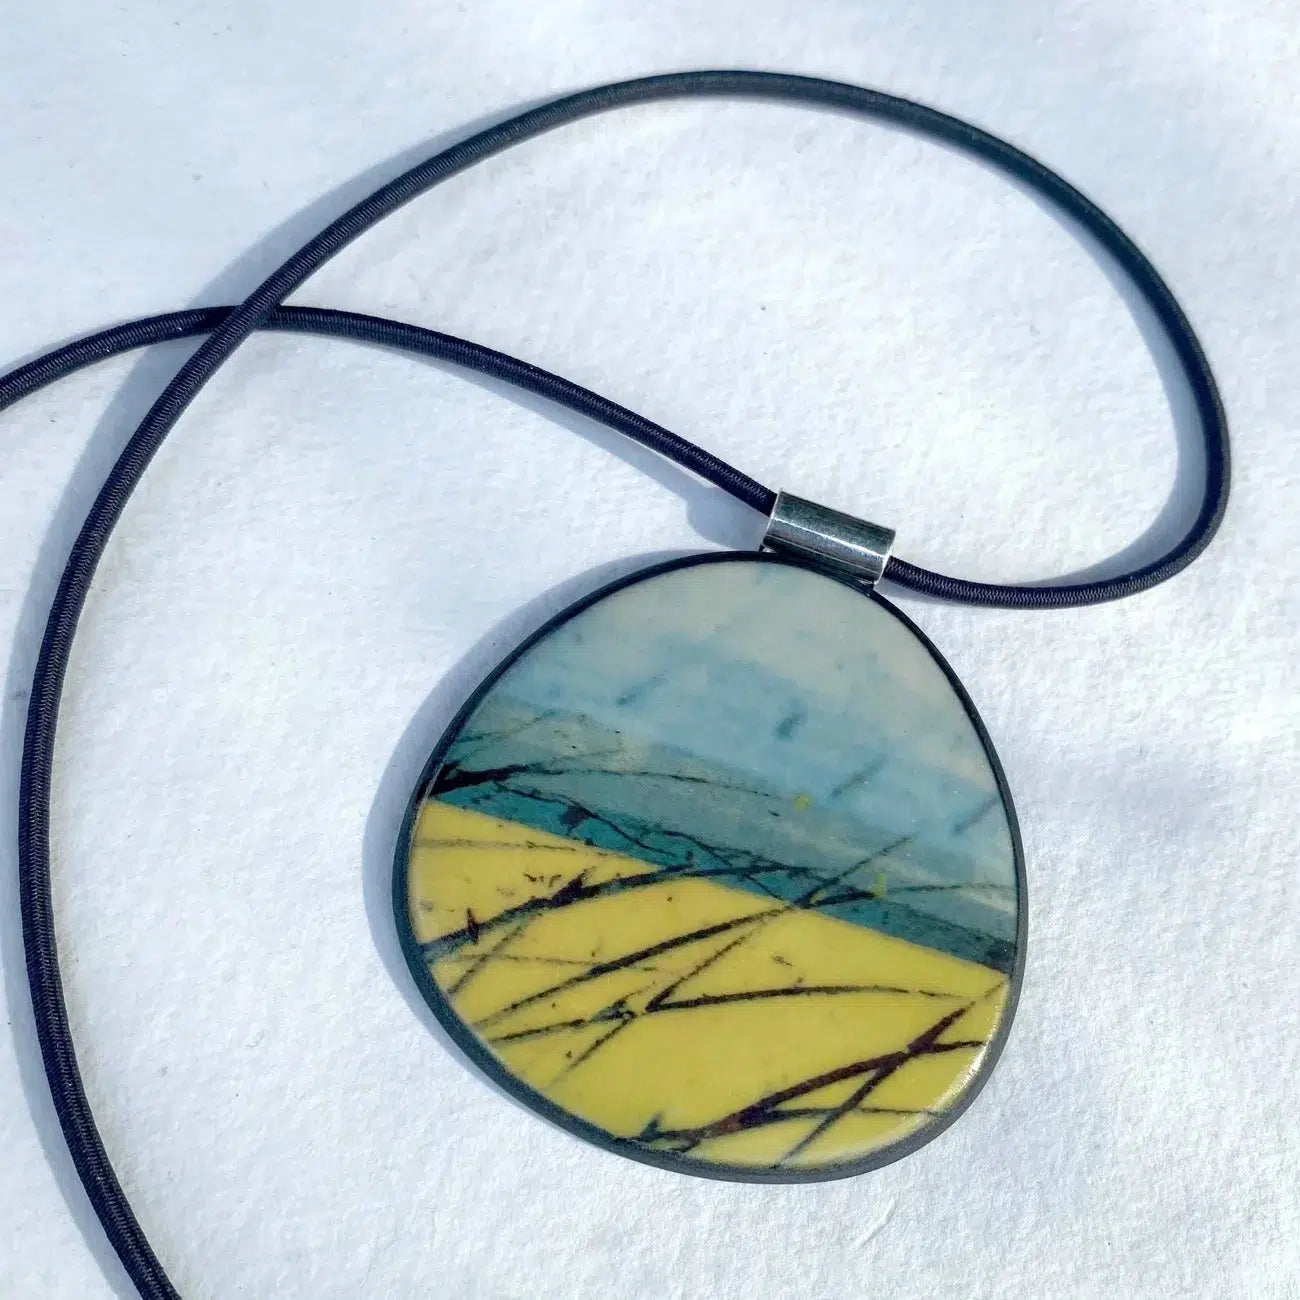 P-SKR Skyline Rounded Pendant by Karen Howarth at Padstow Gallery, Cornwall